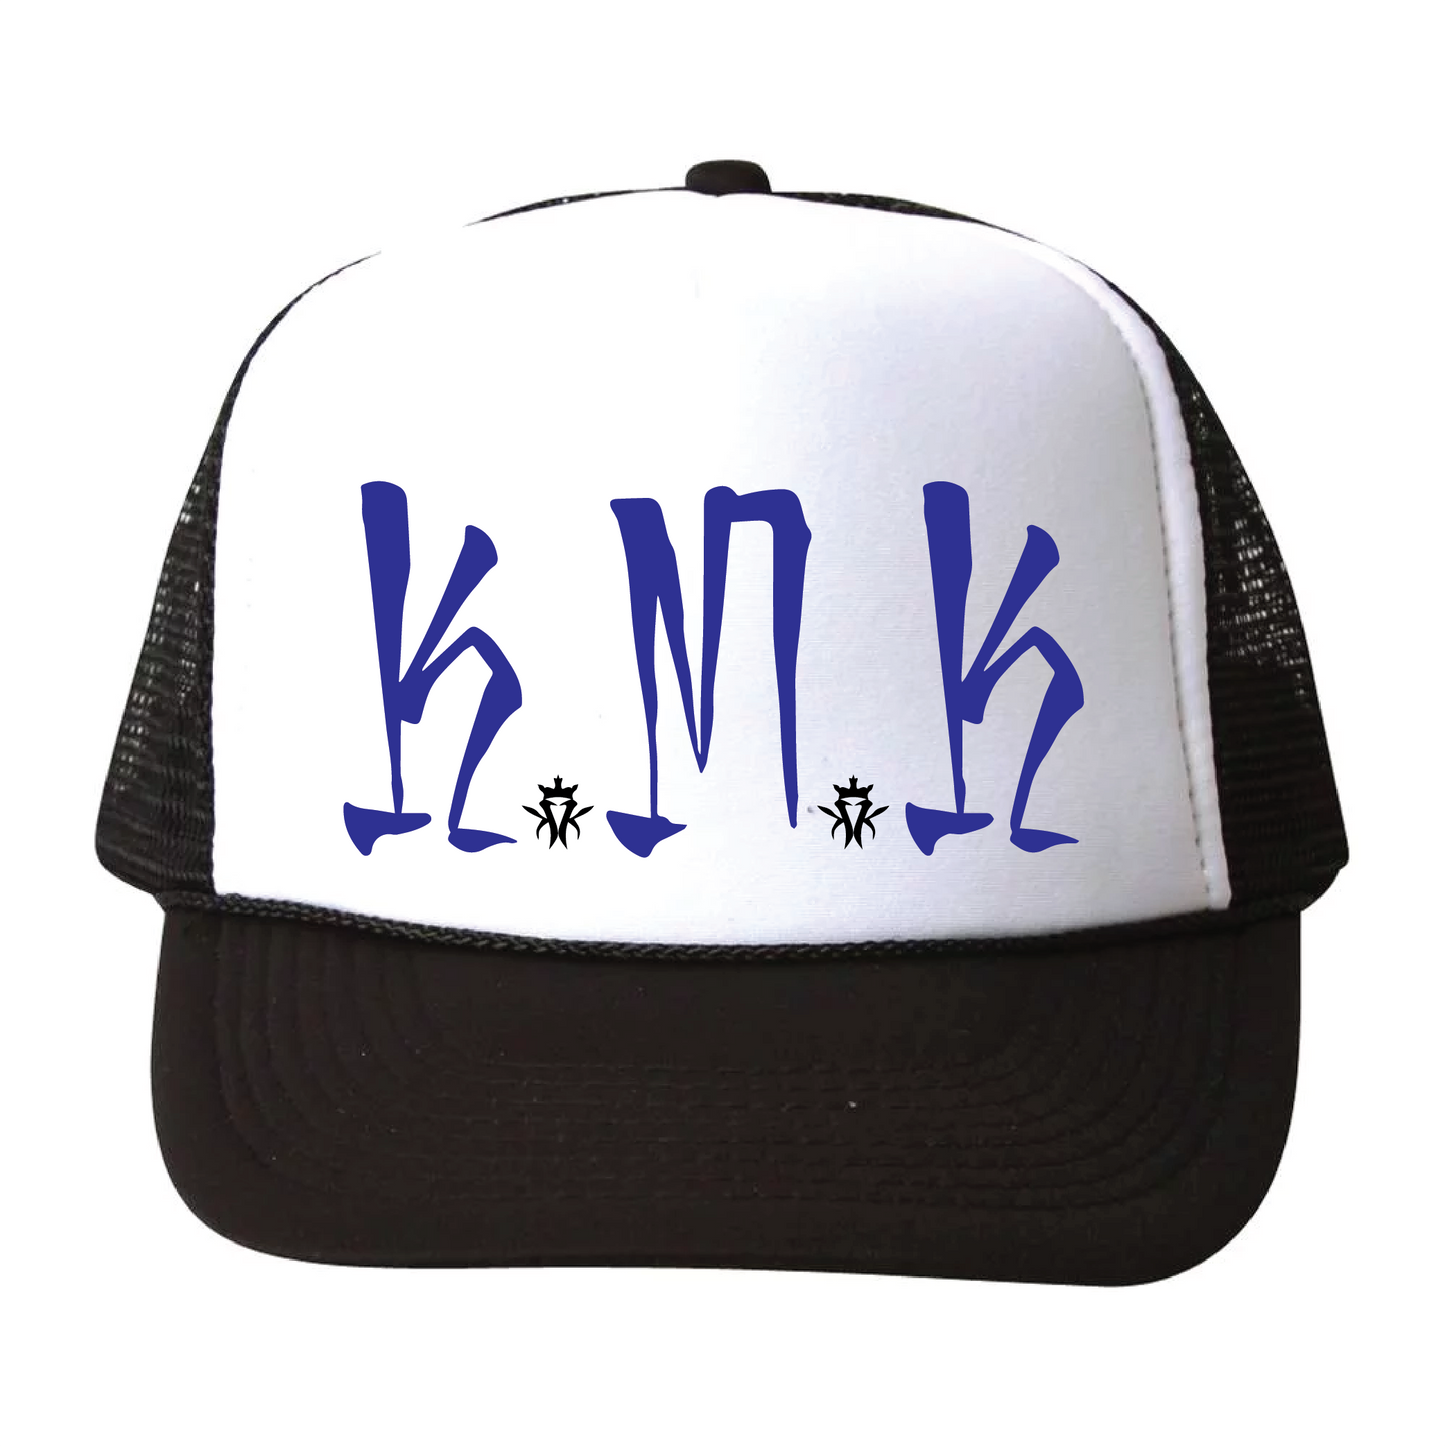 Kottonmouth Rollin Stoned Hat - Blue Letters